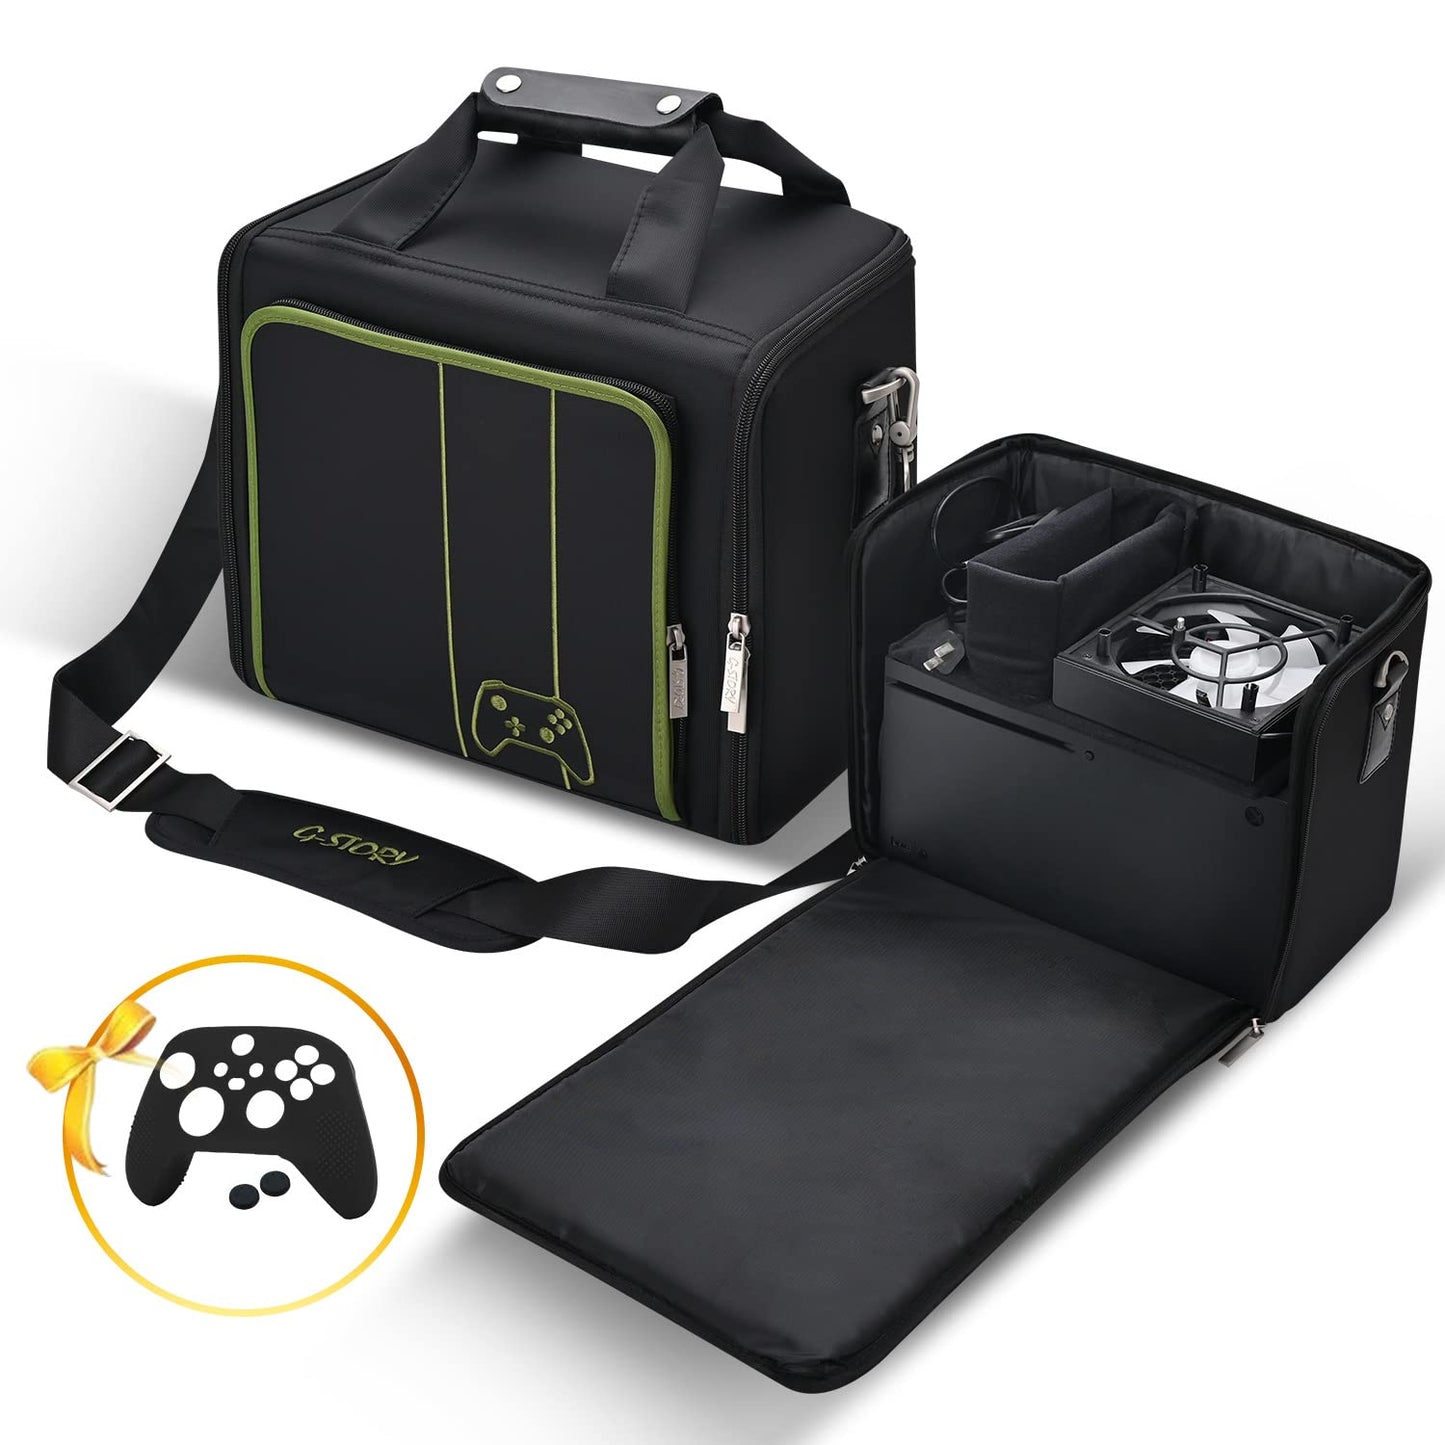 G-STORY Case Storage Bag for Xbox Series X Console Carrying Case